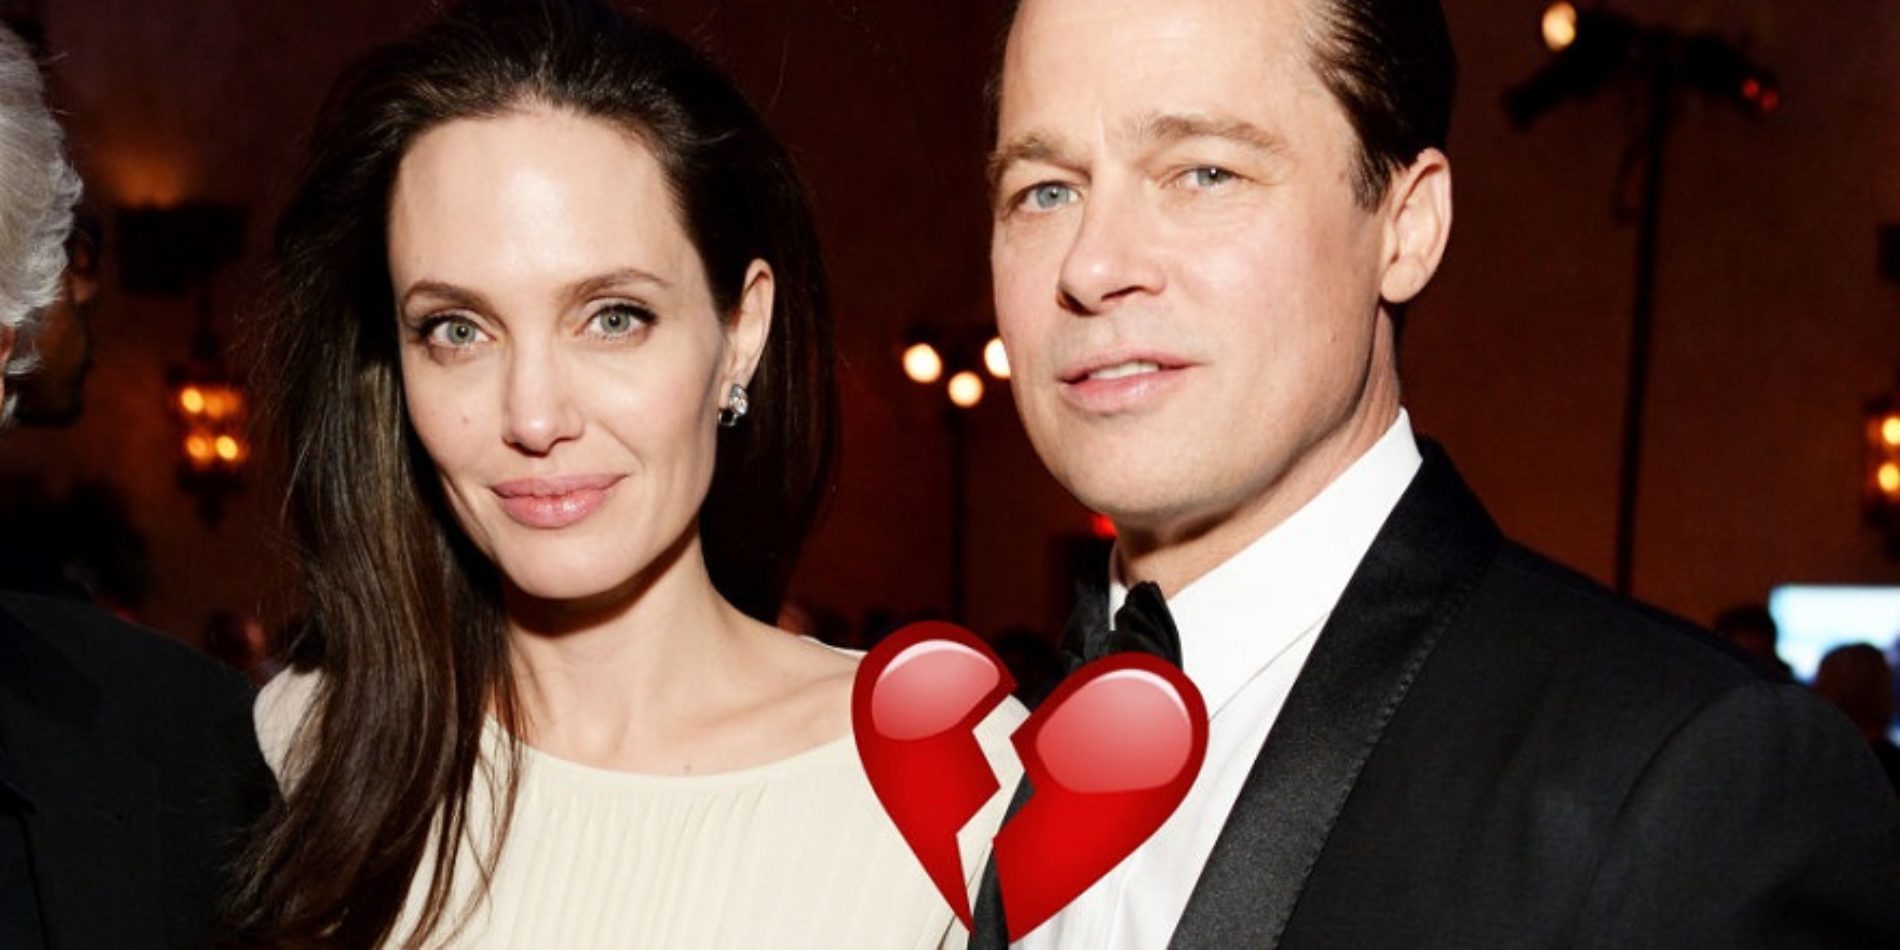 No more Brangelina? Say it ain’t so. Angelina Jolie reportedly files for divorce from Brad Pitt